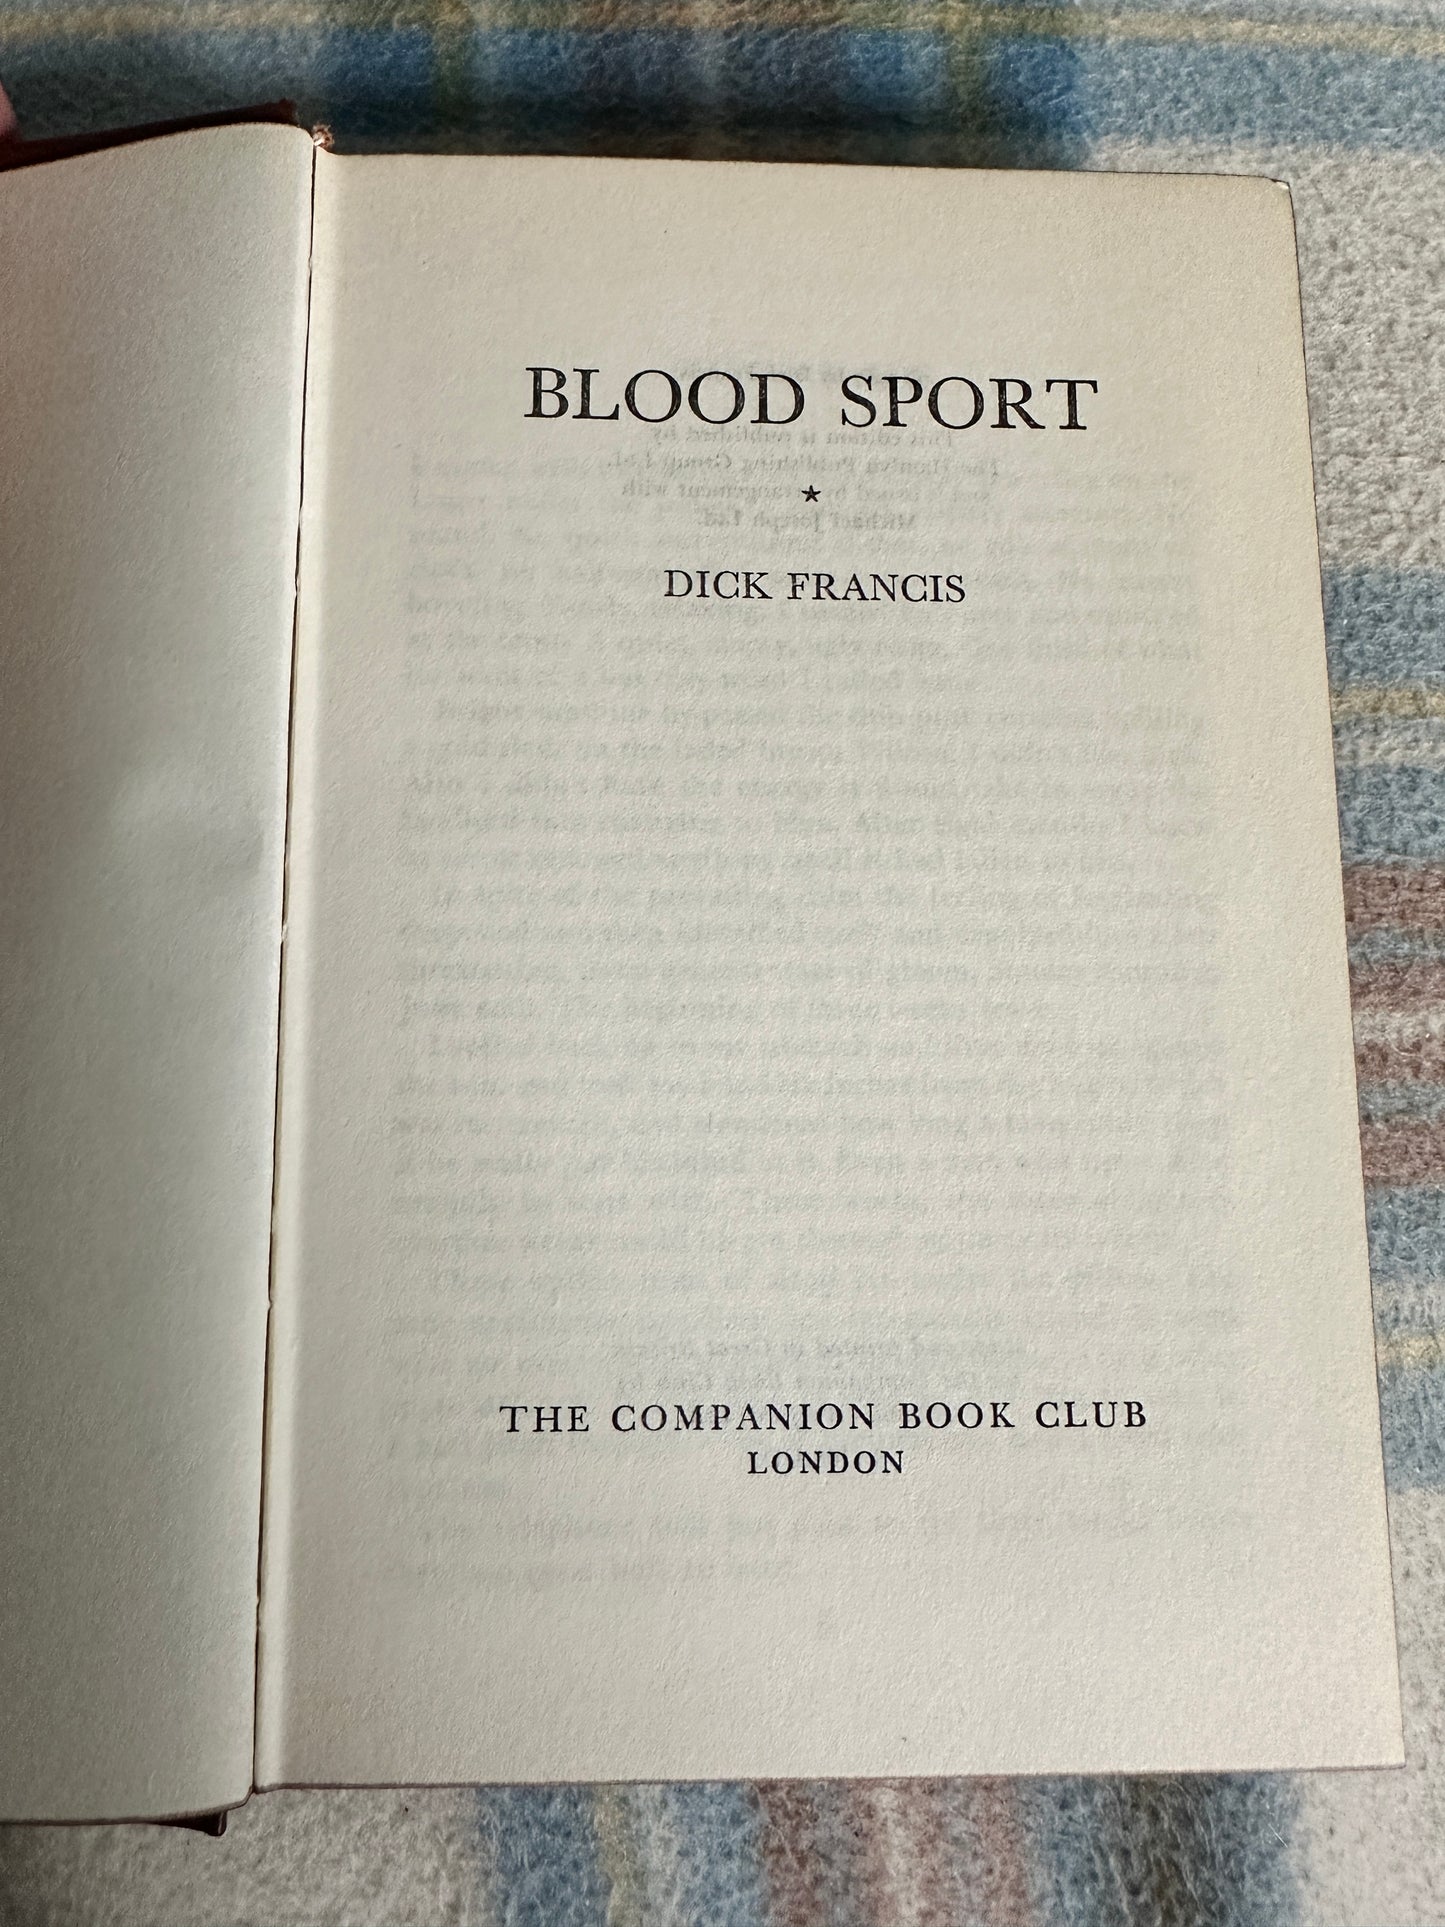 1967*1st* Blood Sport - Dick Francis (Companion Book Club Deluxe Edition)